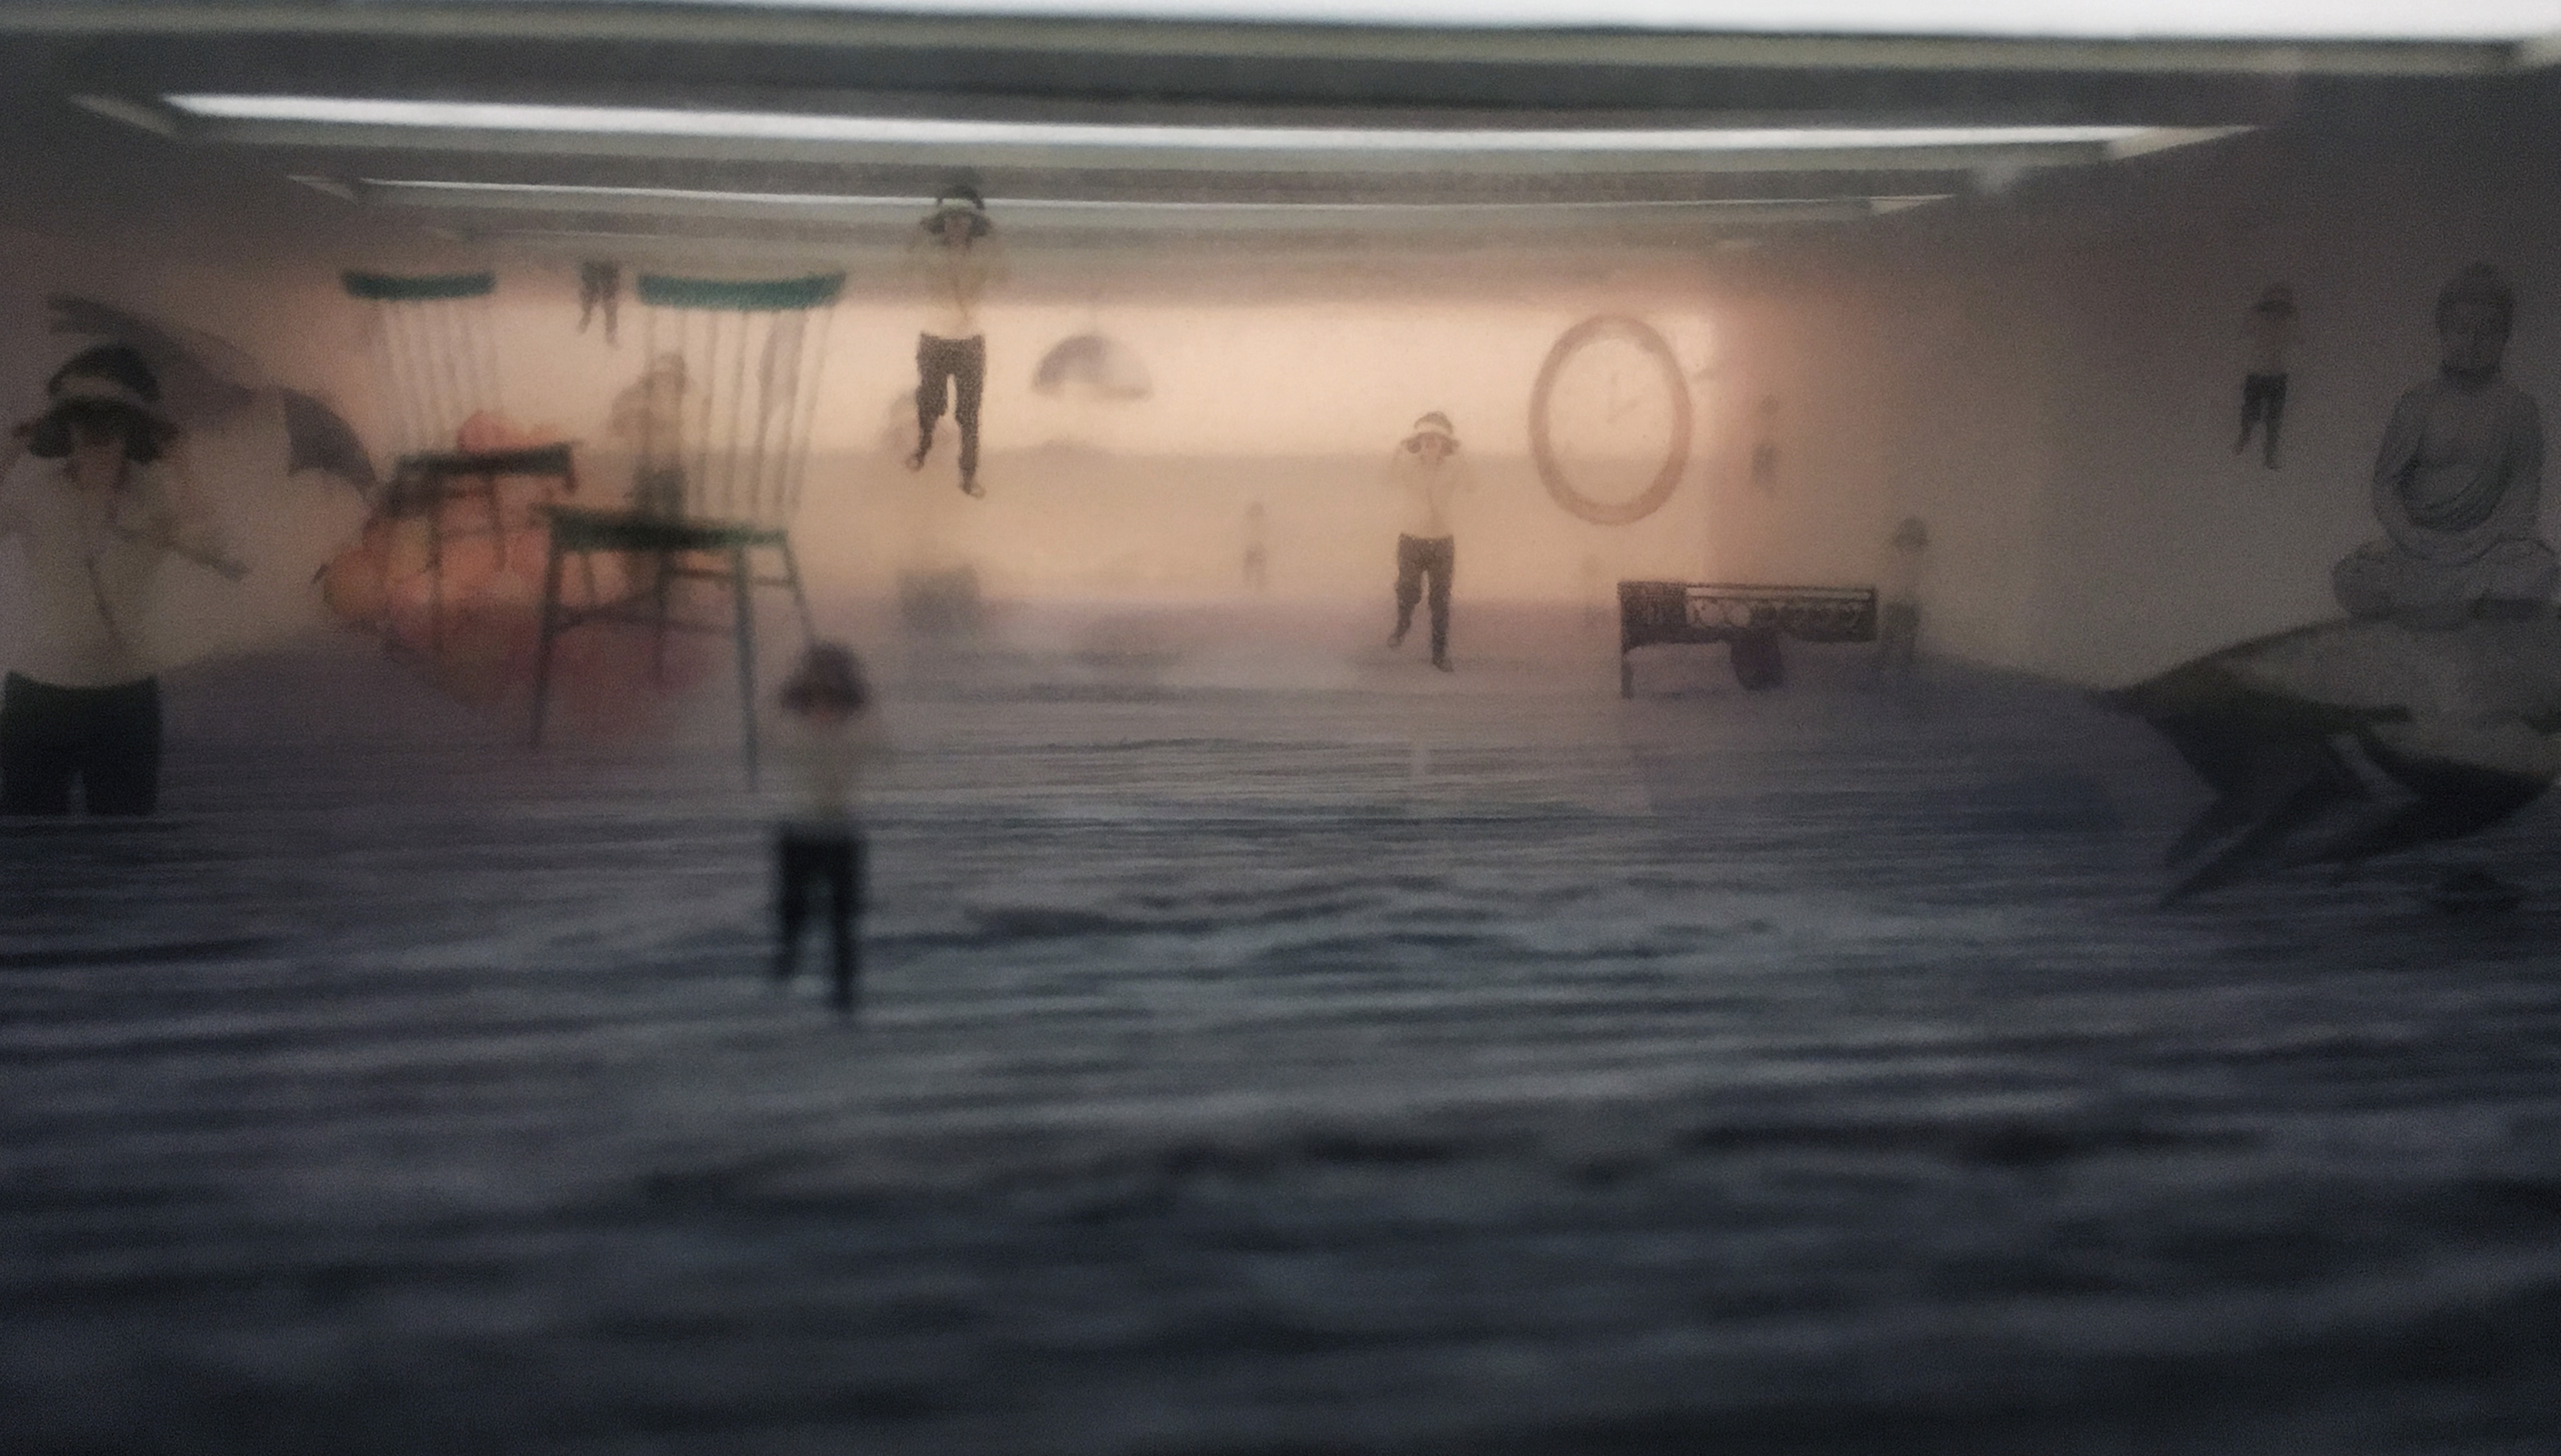 surreal image with floating people and chairs